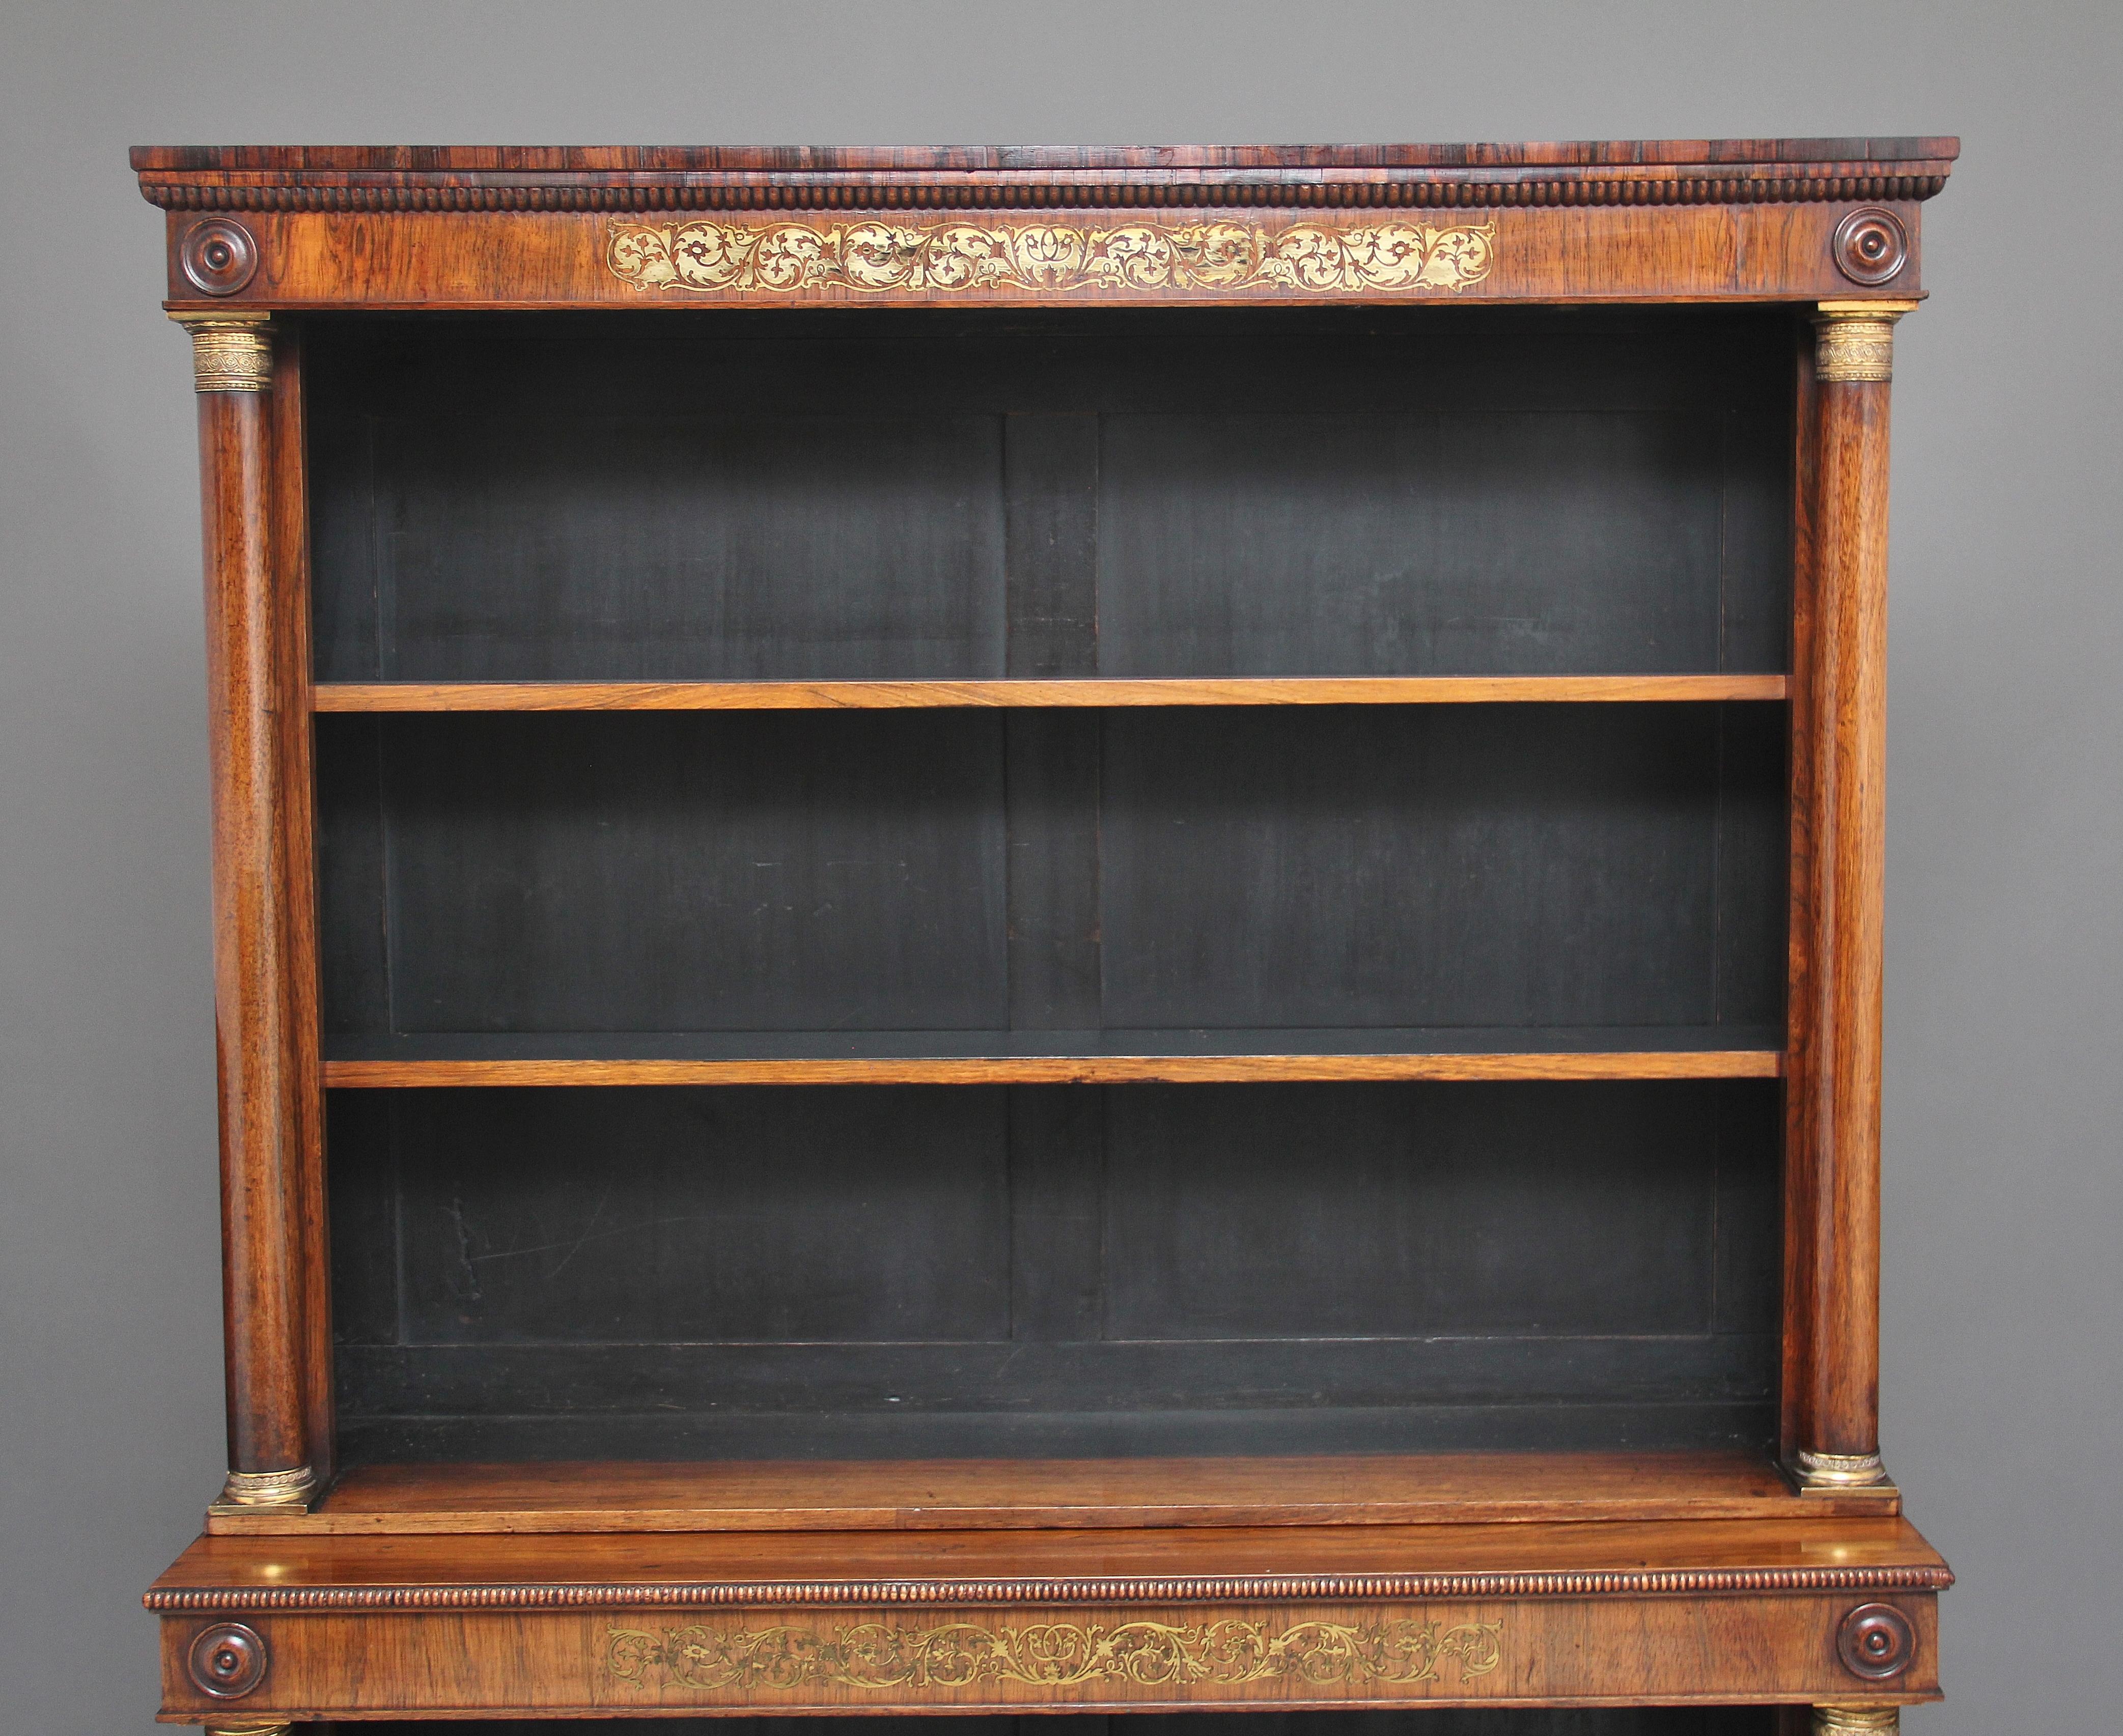 Early 19th century rosewood and brass inlaid open bookcase, the moulded edge top having carved beading running along the front and sides, wonderful brass inlaid pattern on the top and bottom frieze, turned columns decorated with brass capitals,